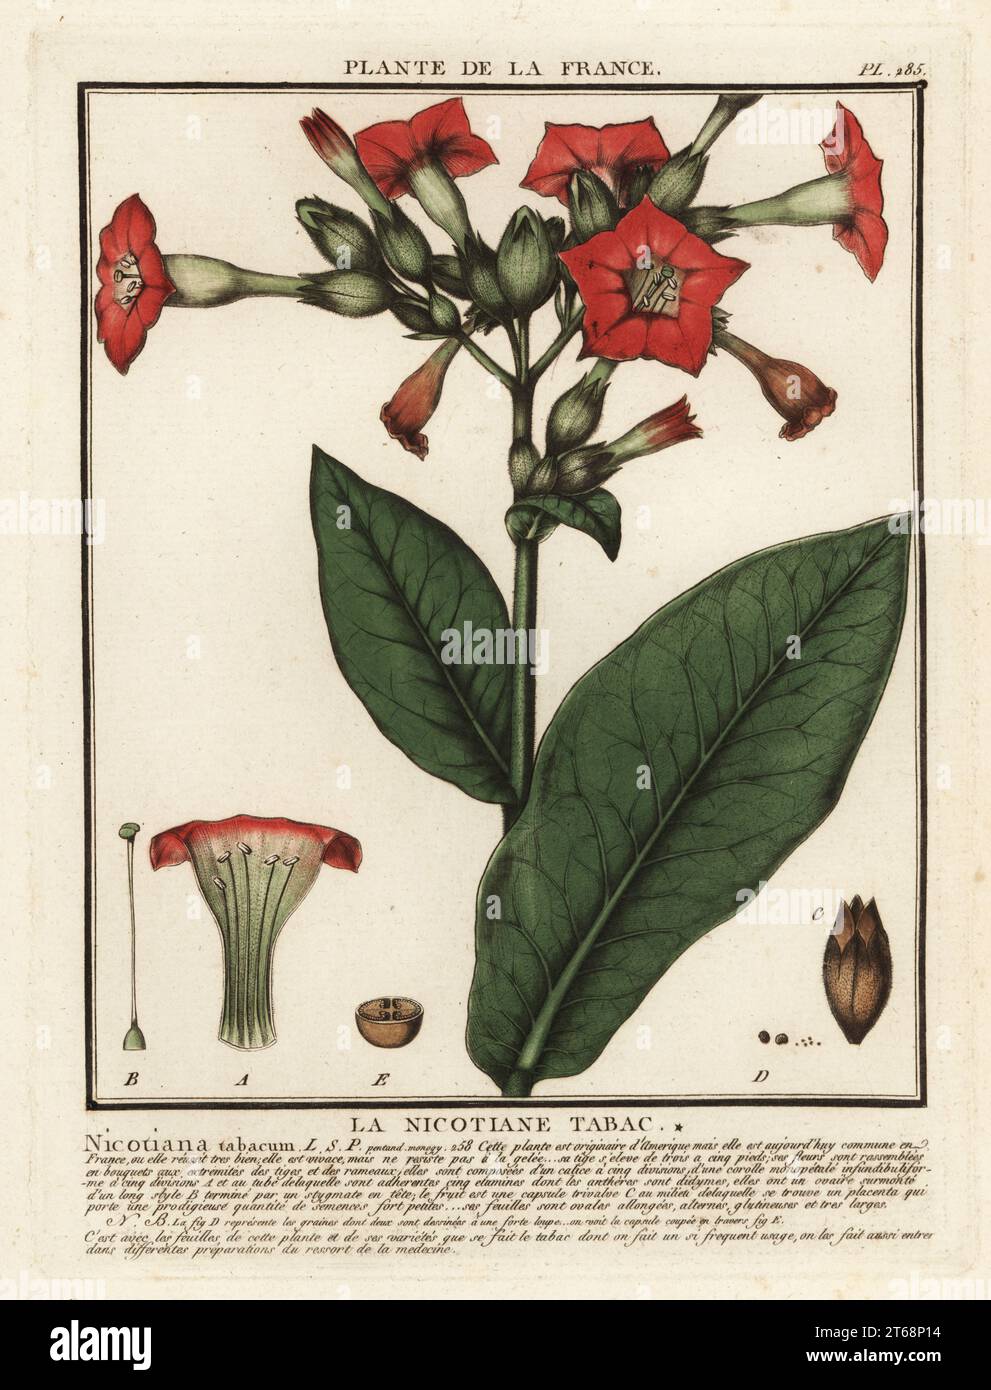 Cultivated tobacco, Le nicotiane tabac, Nicotiana tabacum. Copperplate engraving printed in three colours by Pierre Bulliard from his Herbier de la France, ou collection complete des plantes indigenes de ce royaume, Didot jeune, Debure et Belin, 1780-1793. Stock Photo